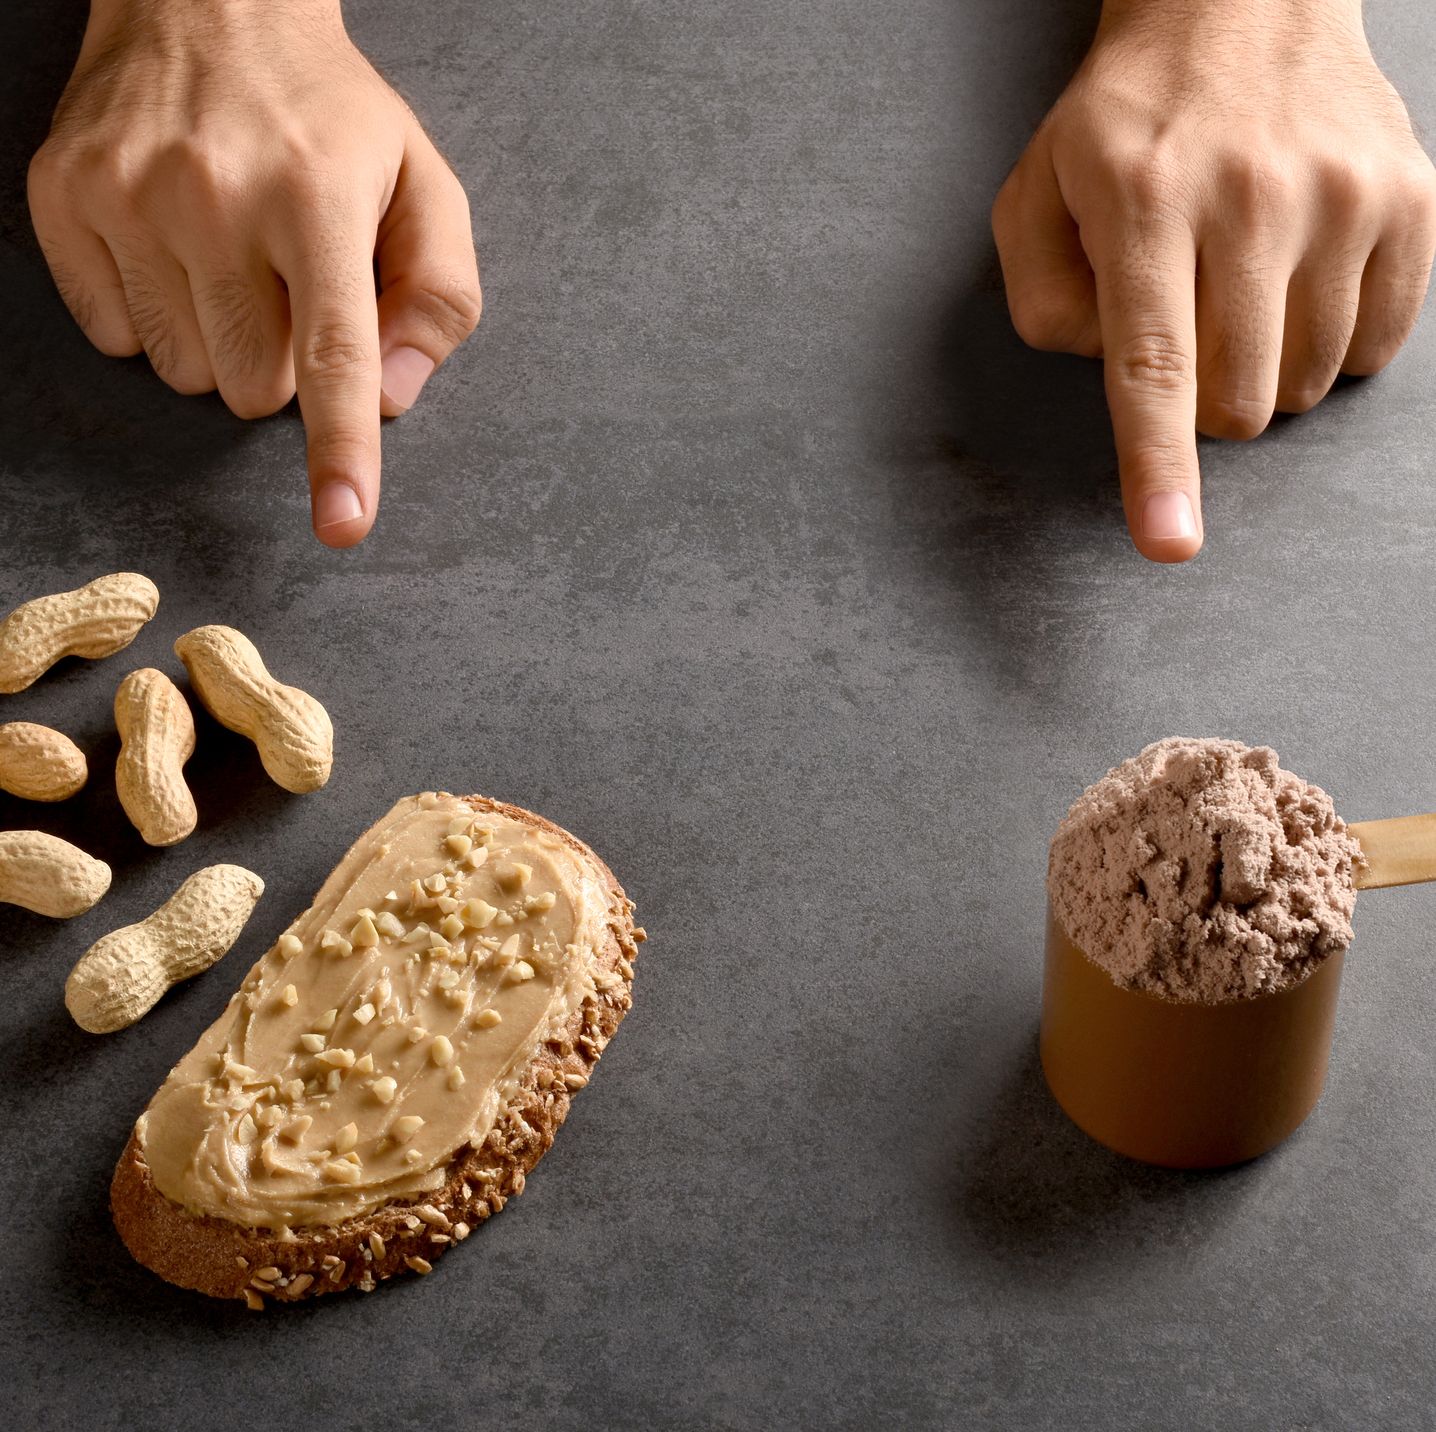 Peanut Butter Is Healthy—If You Follow This 1 Rule